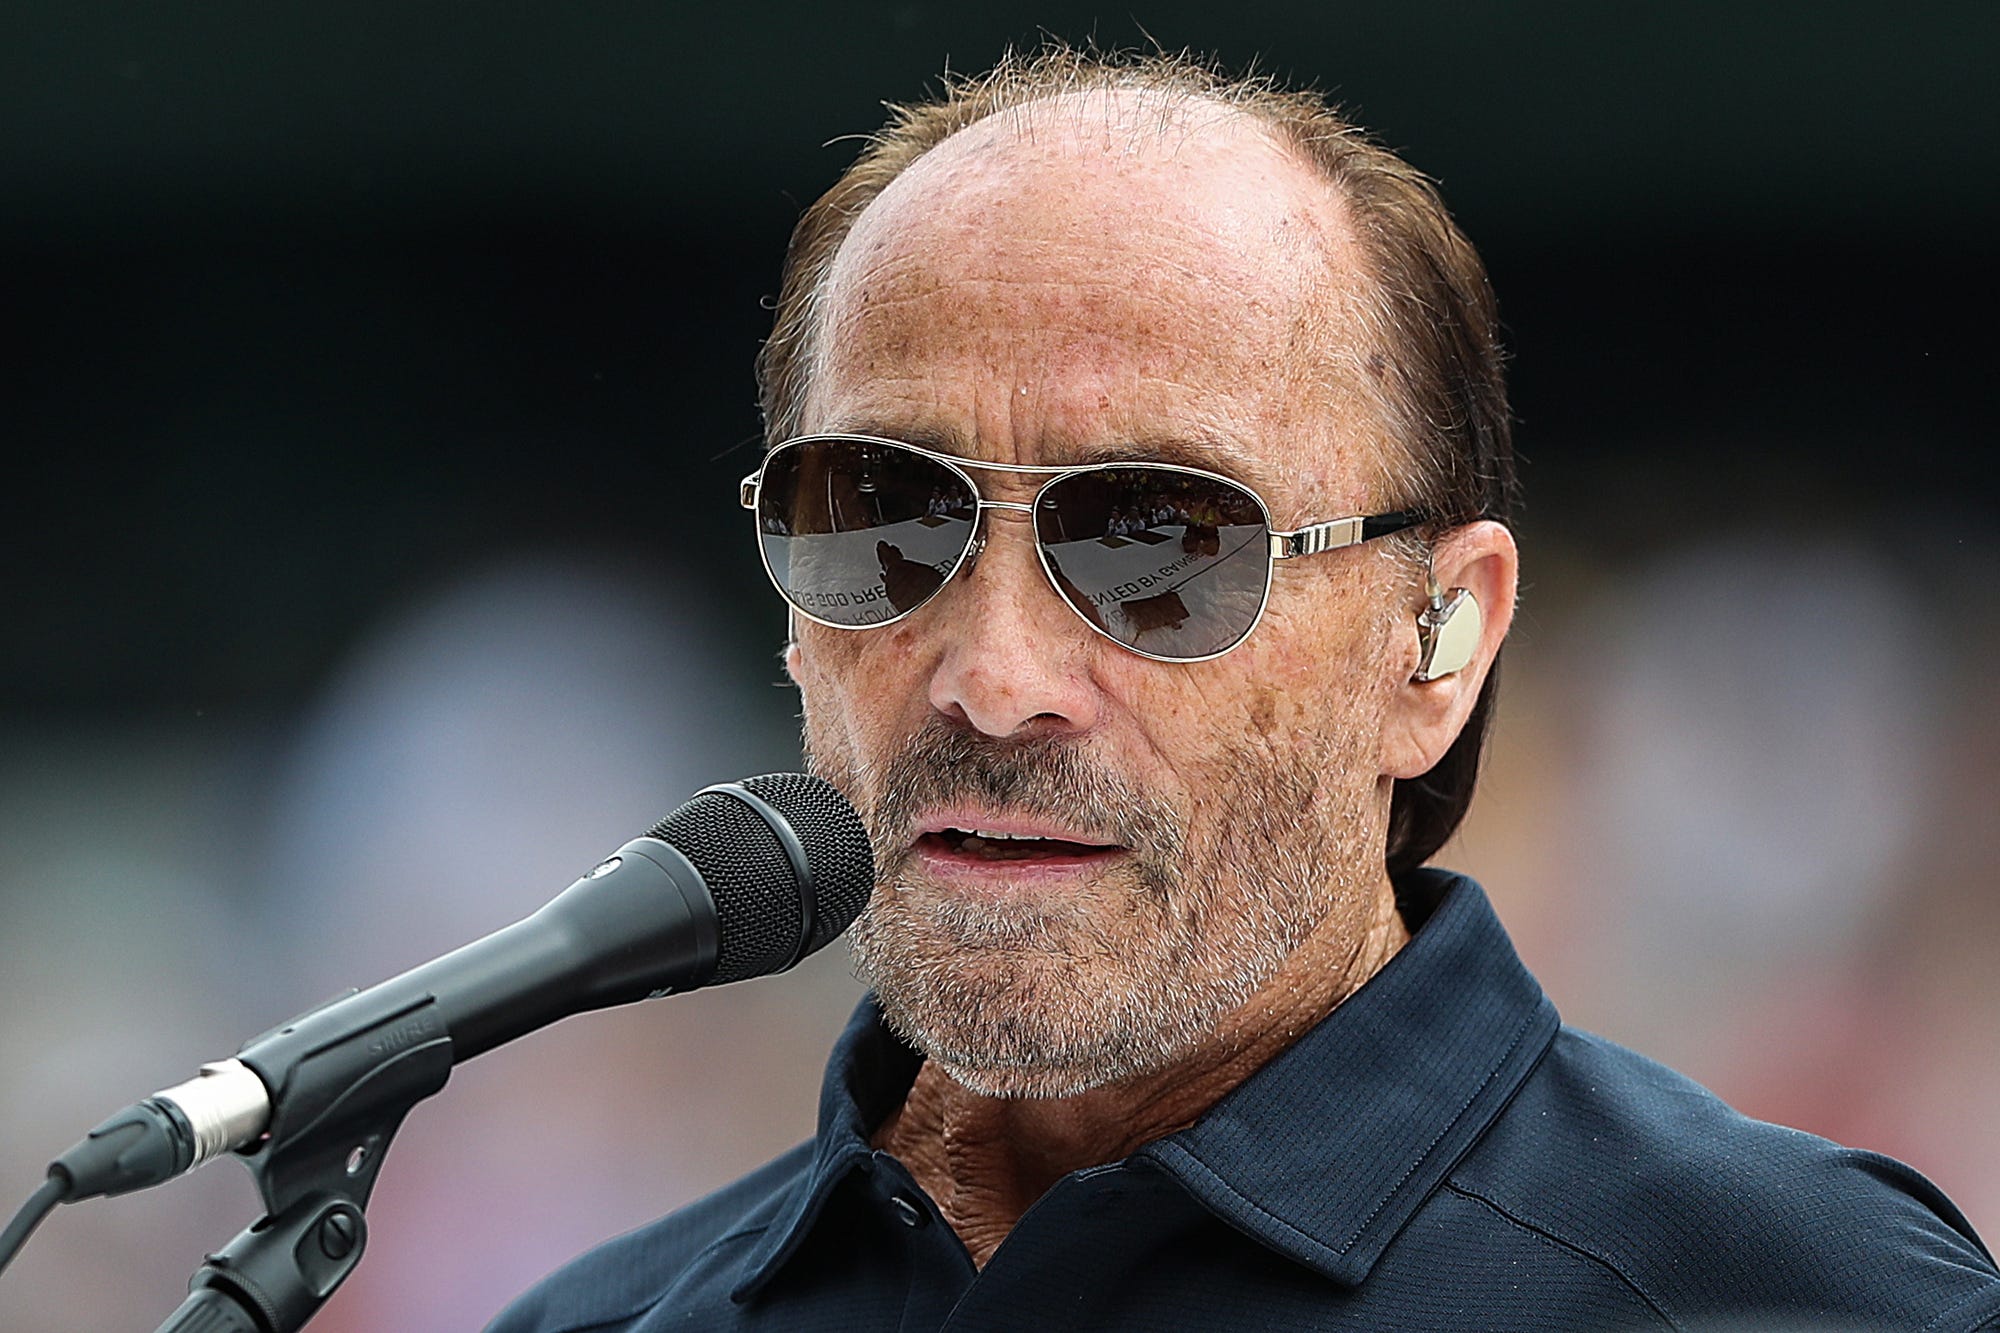 Lee Greenwood's hit song inspires new 'God Bless the USA Bible'